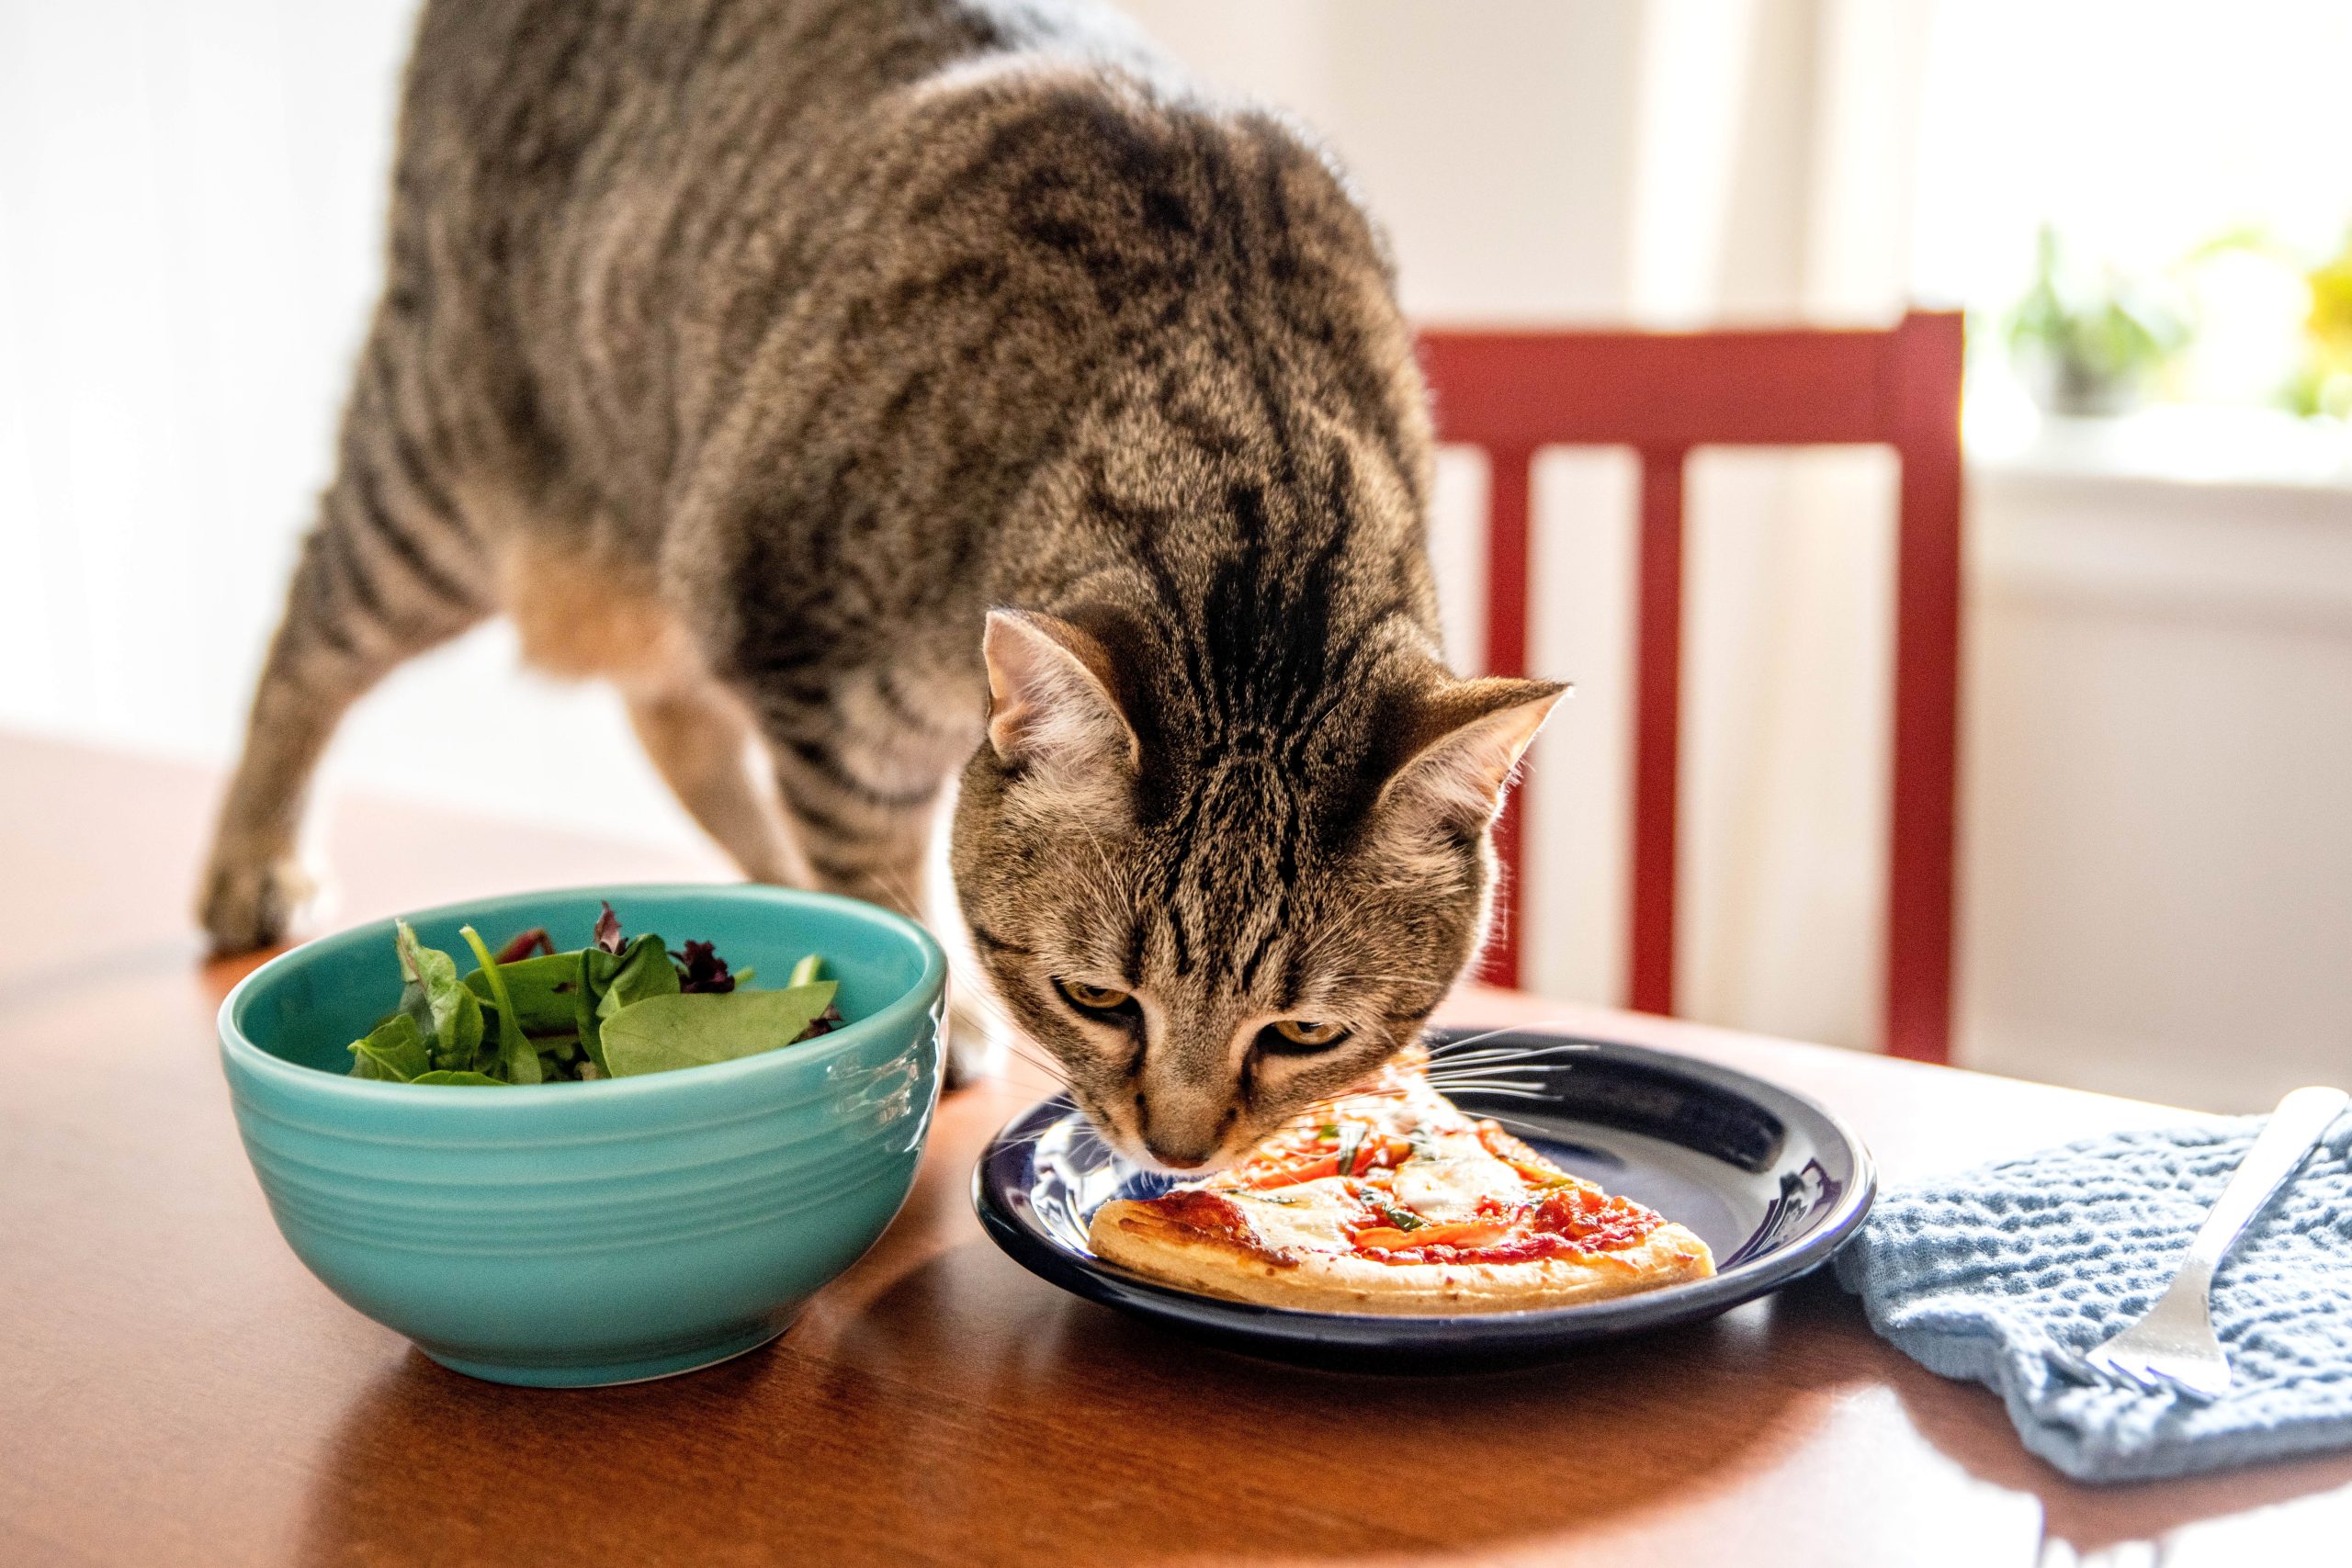 Regularly clean your cat's utensils and eating area